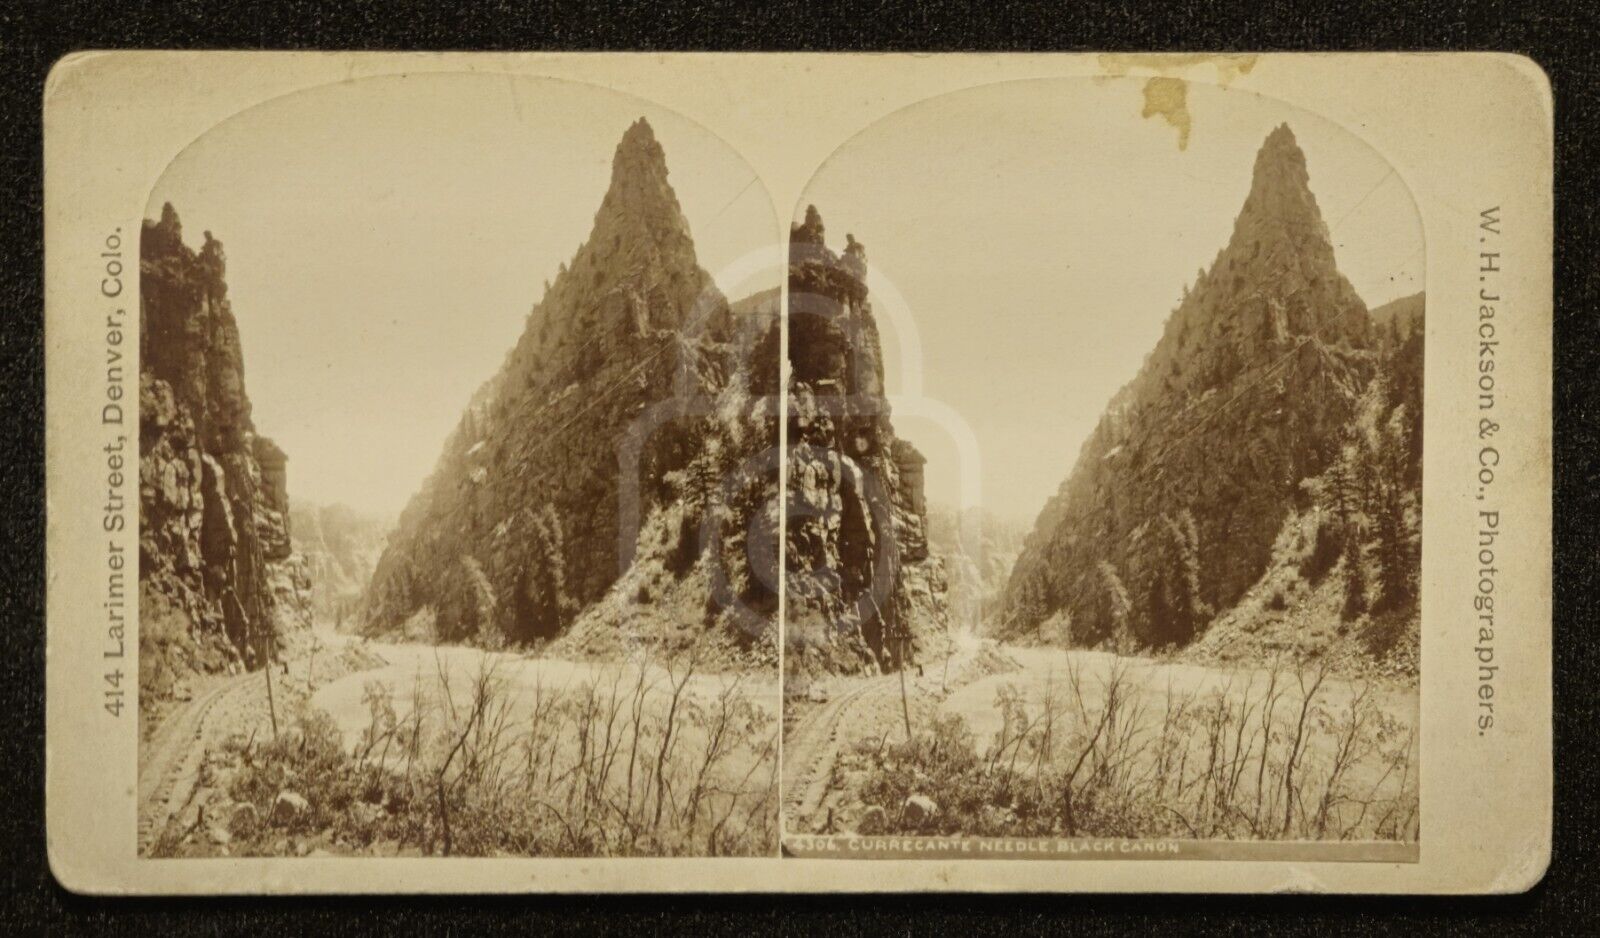 Early Scarce W. H. Jackson Stereoview of Currecante Needle, Colorado. C 1880\'s 